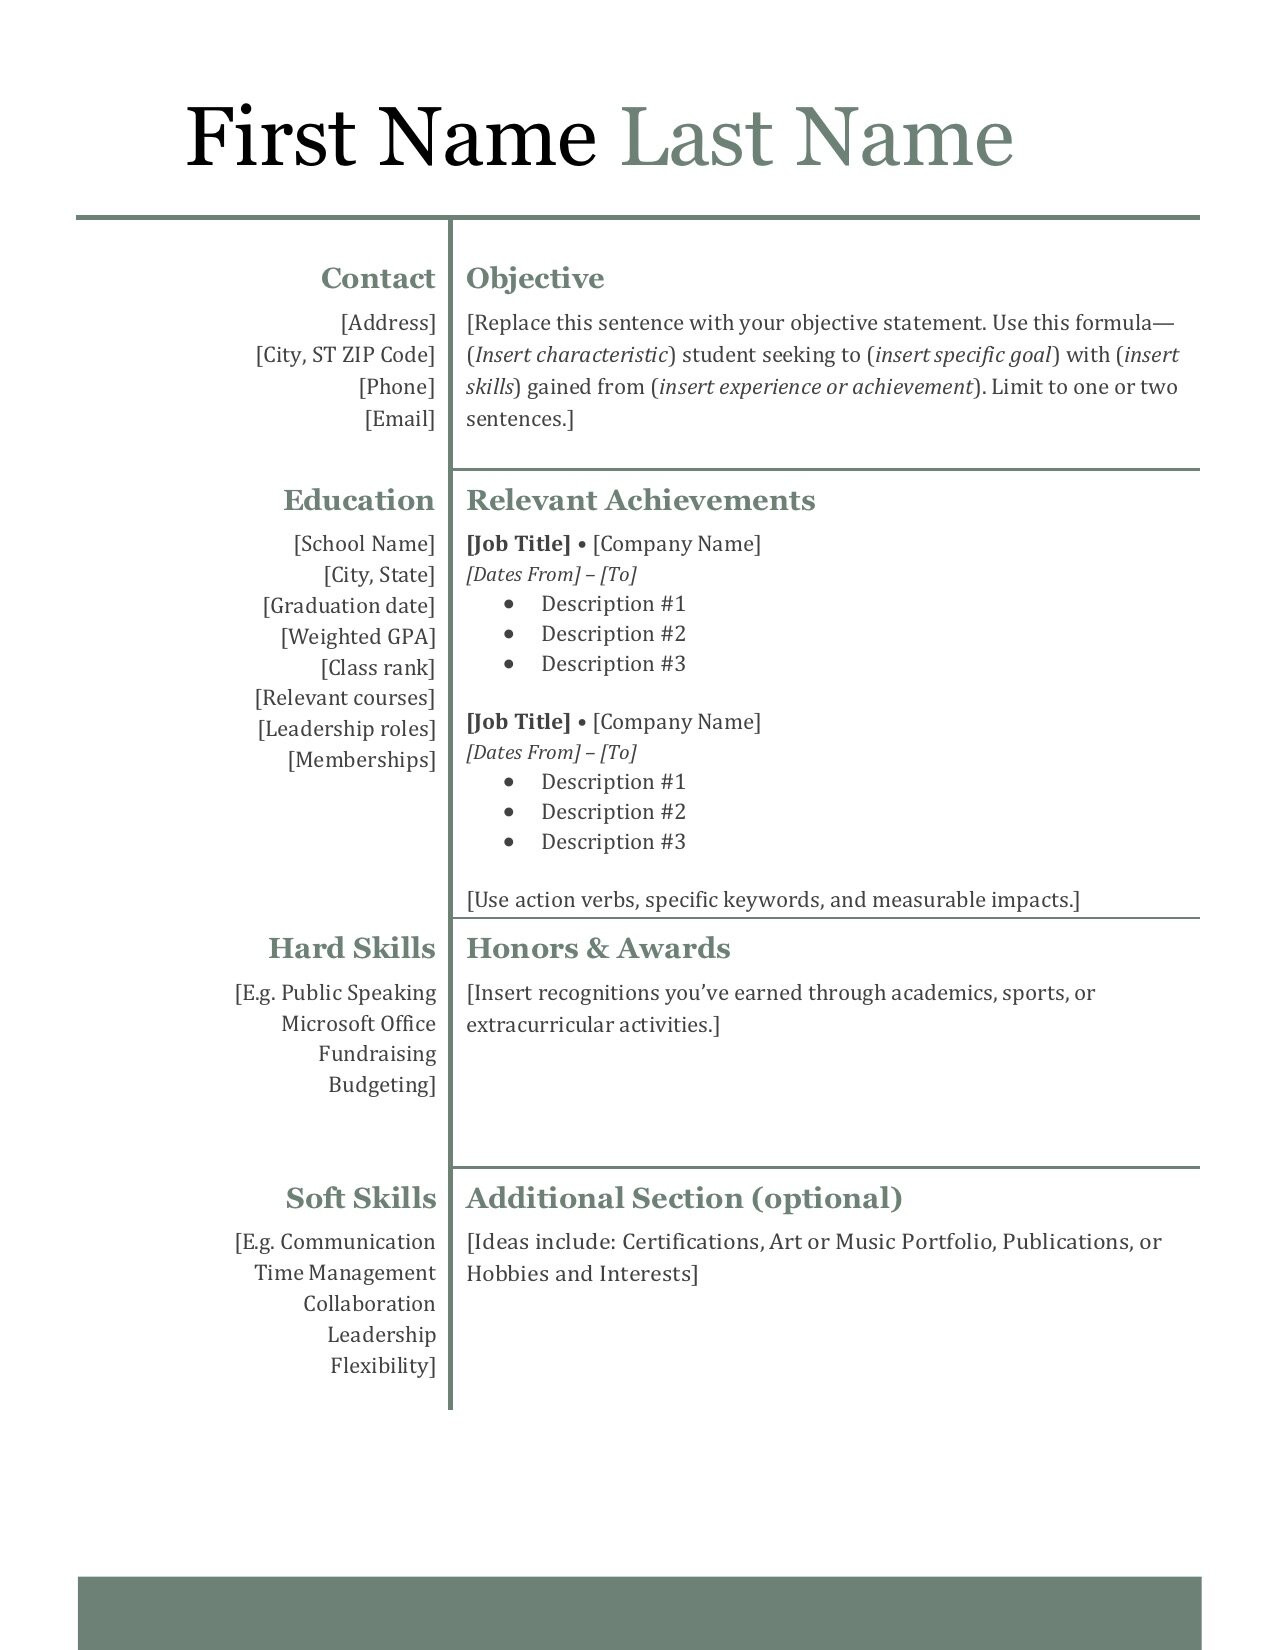 Sample High School Resume with Experience How to Write An Impressive High School Resume â Shemmassian …